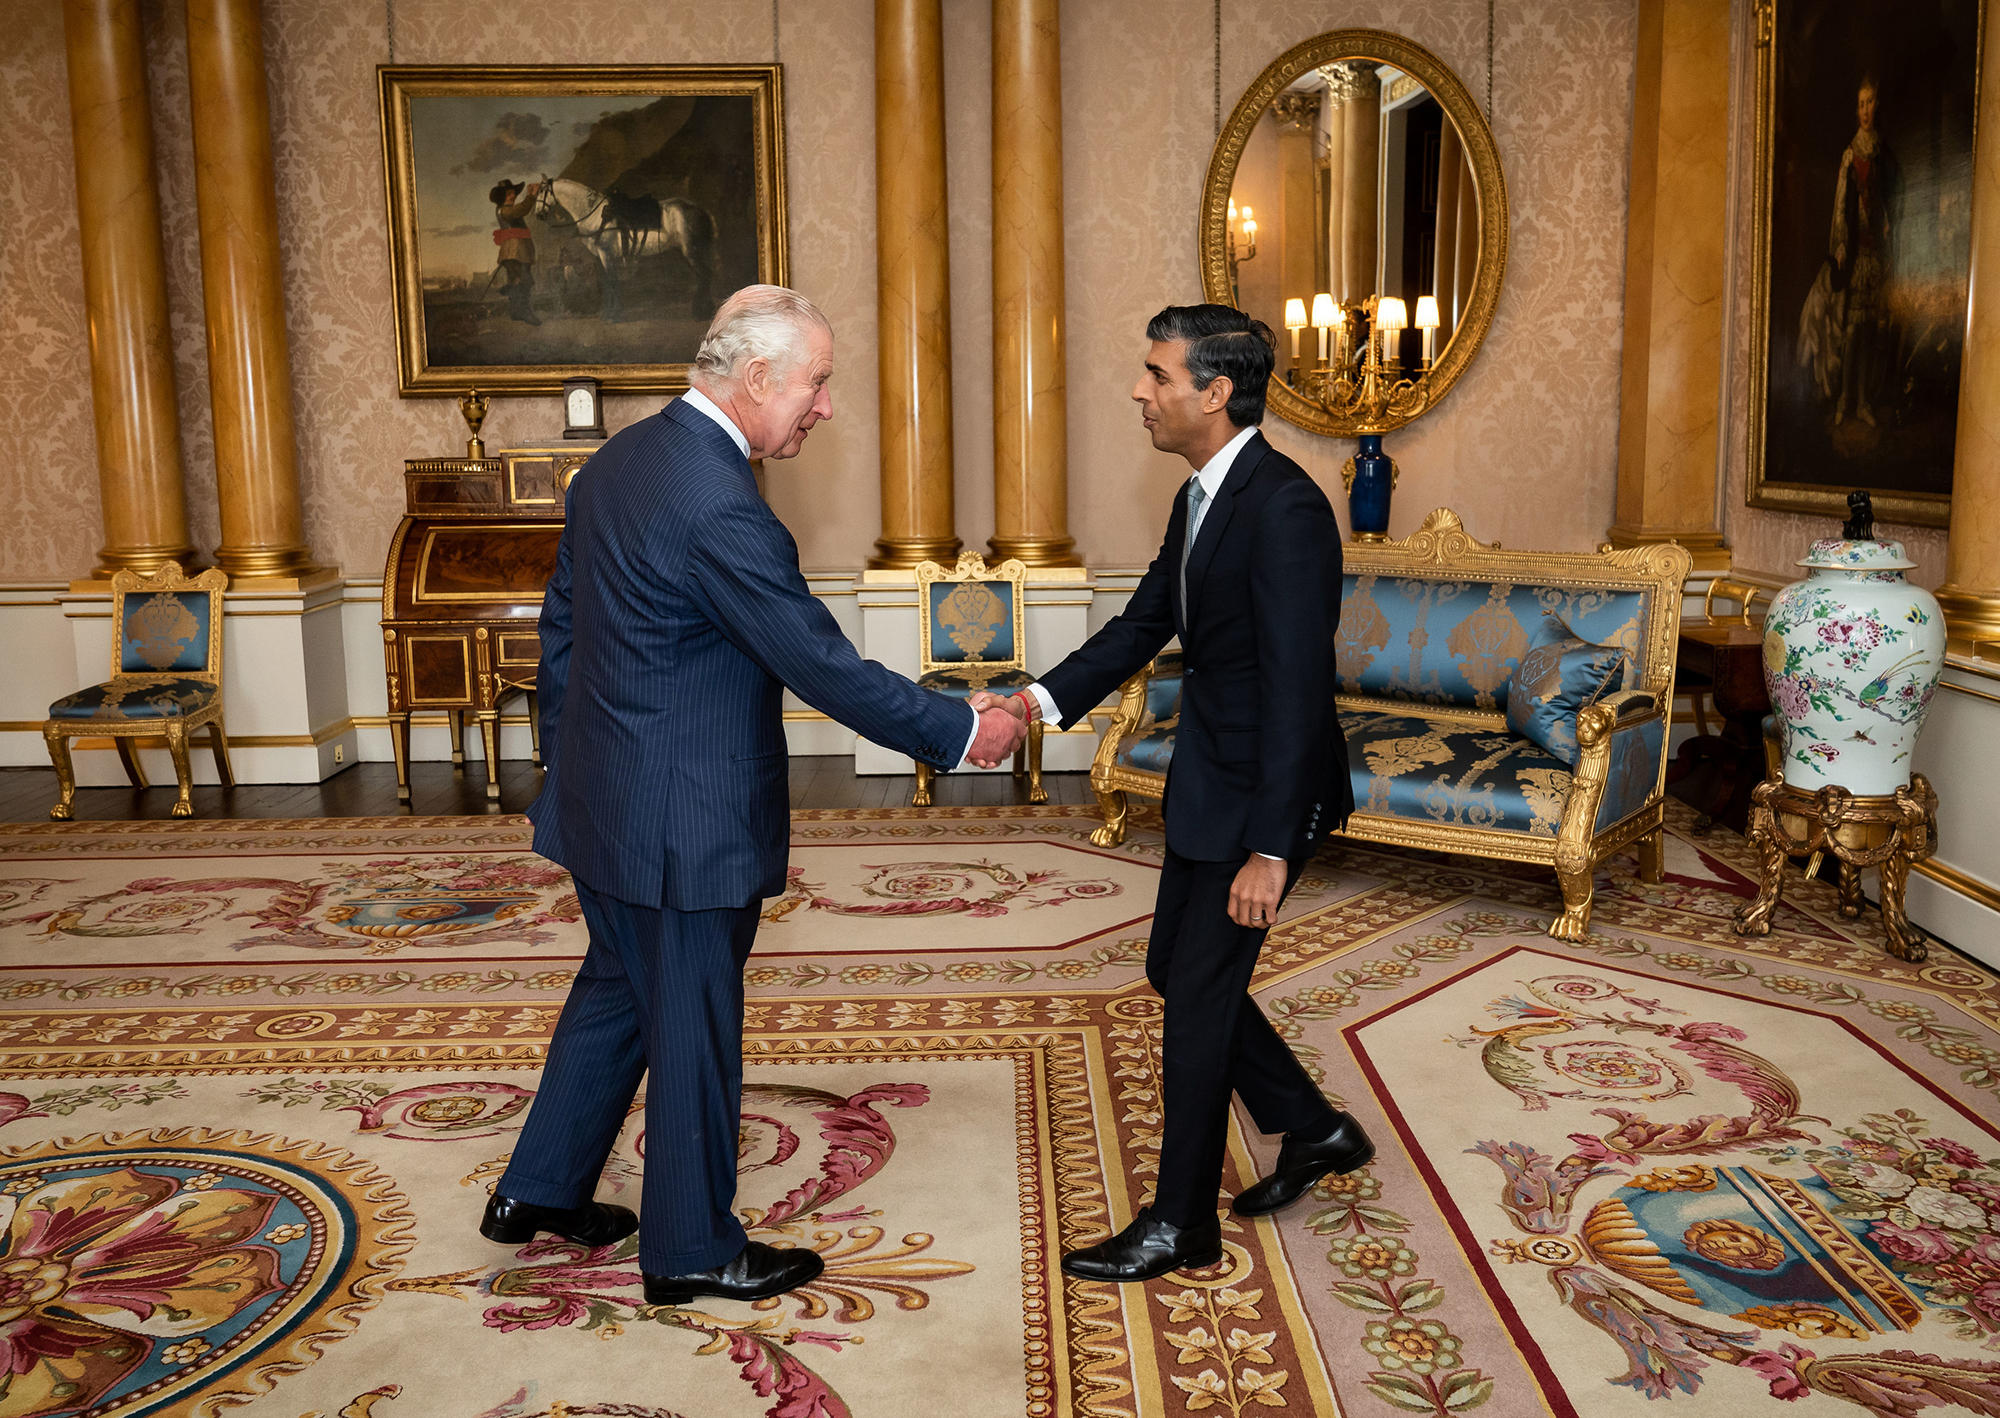 King Charles III welcomes Rishi Sunak during an audience at Buckingham Palace, where he invited the newly elected leader of the Conservative Party to become Prime Minister and form a new government on Tuesday in London.